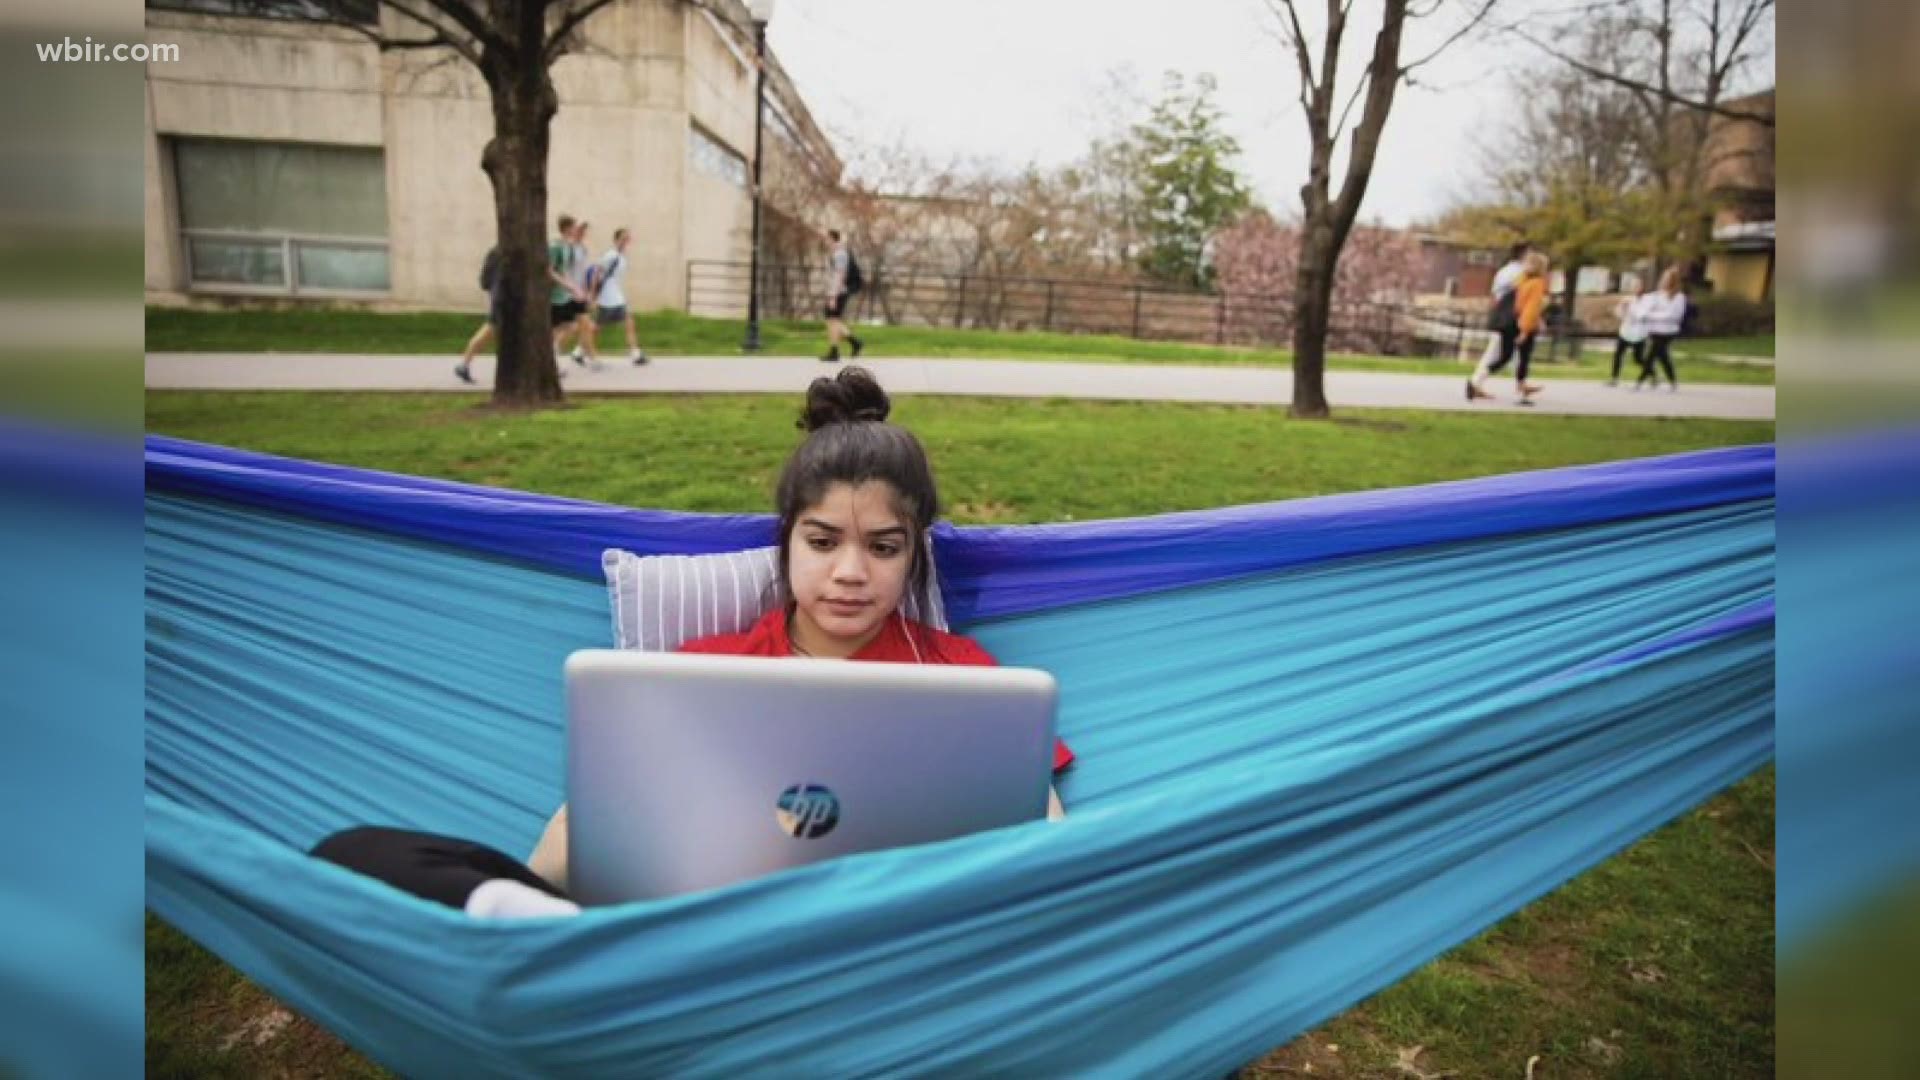 UT set up these hammock stands across campus along with tents for outdoor studying.